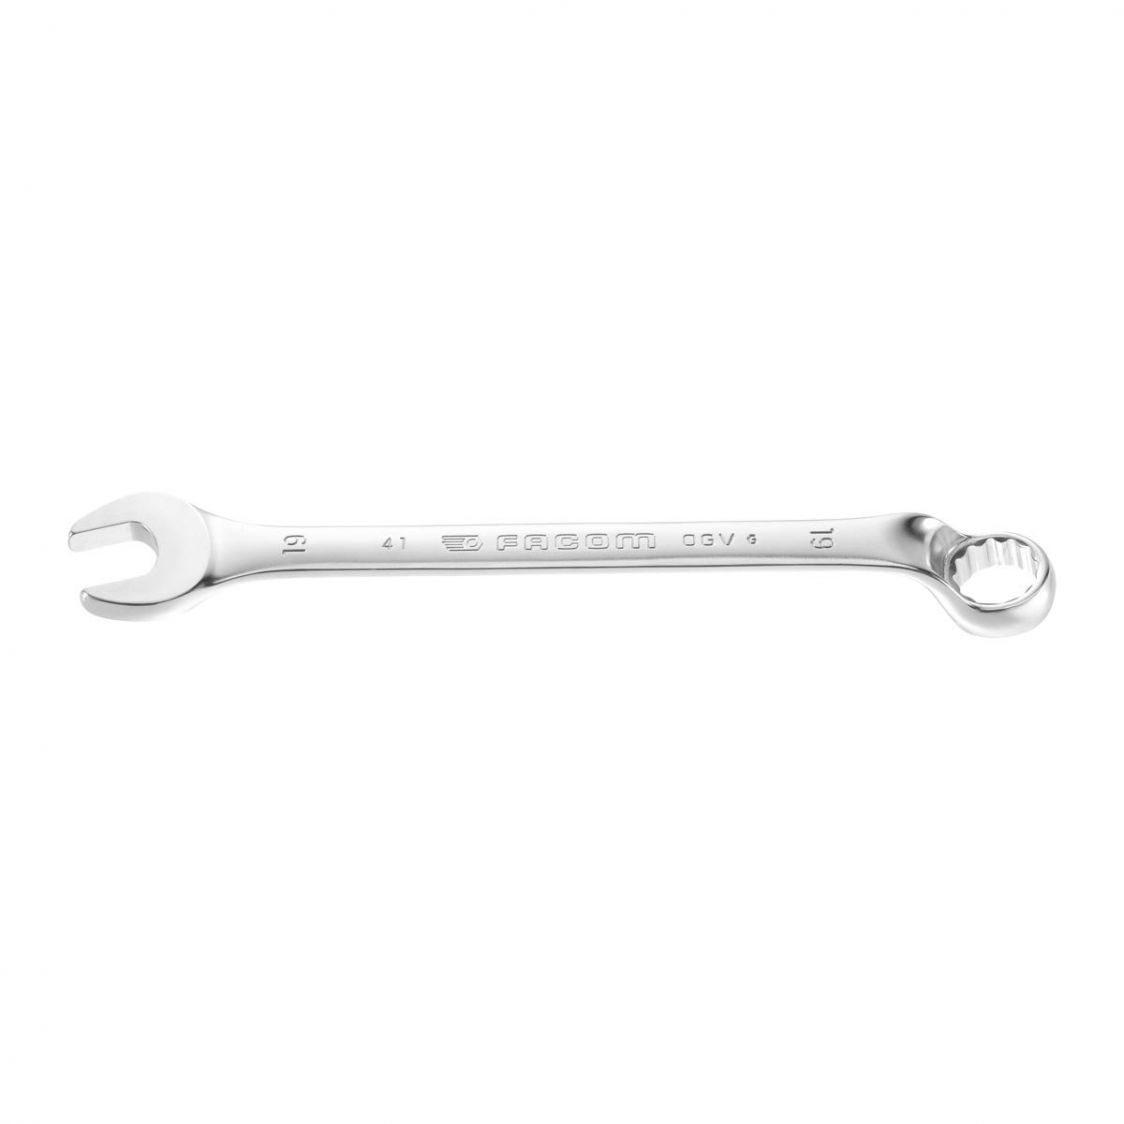 FACOM 41.30 - 30mm Metric Offset Combination Spanner